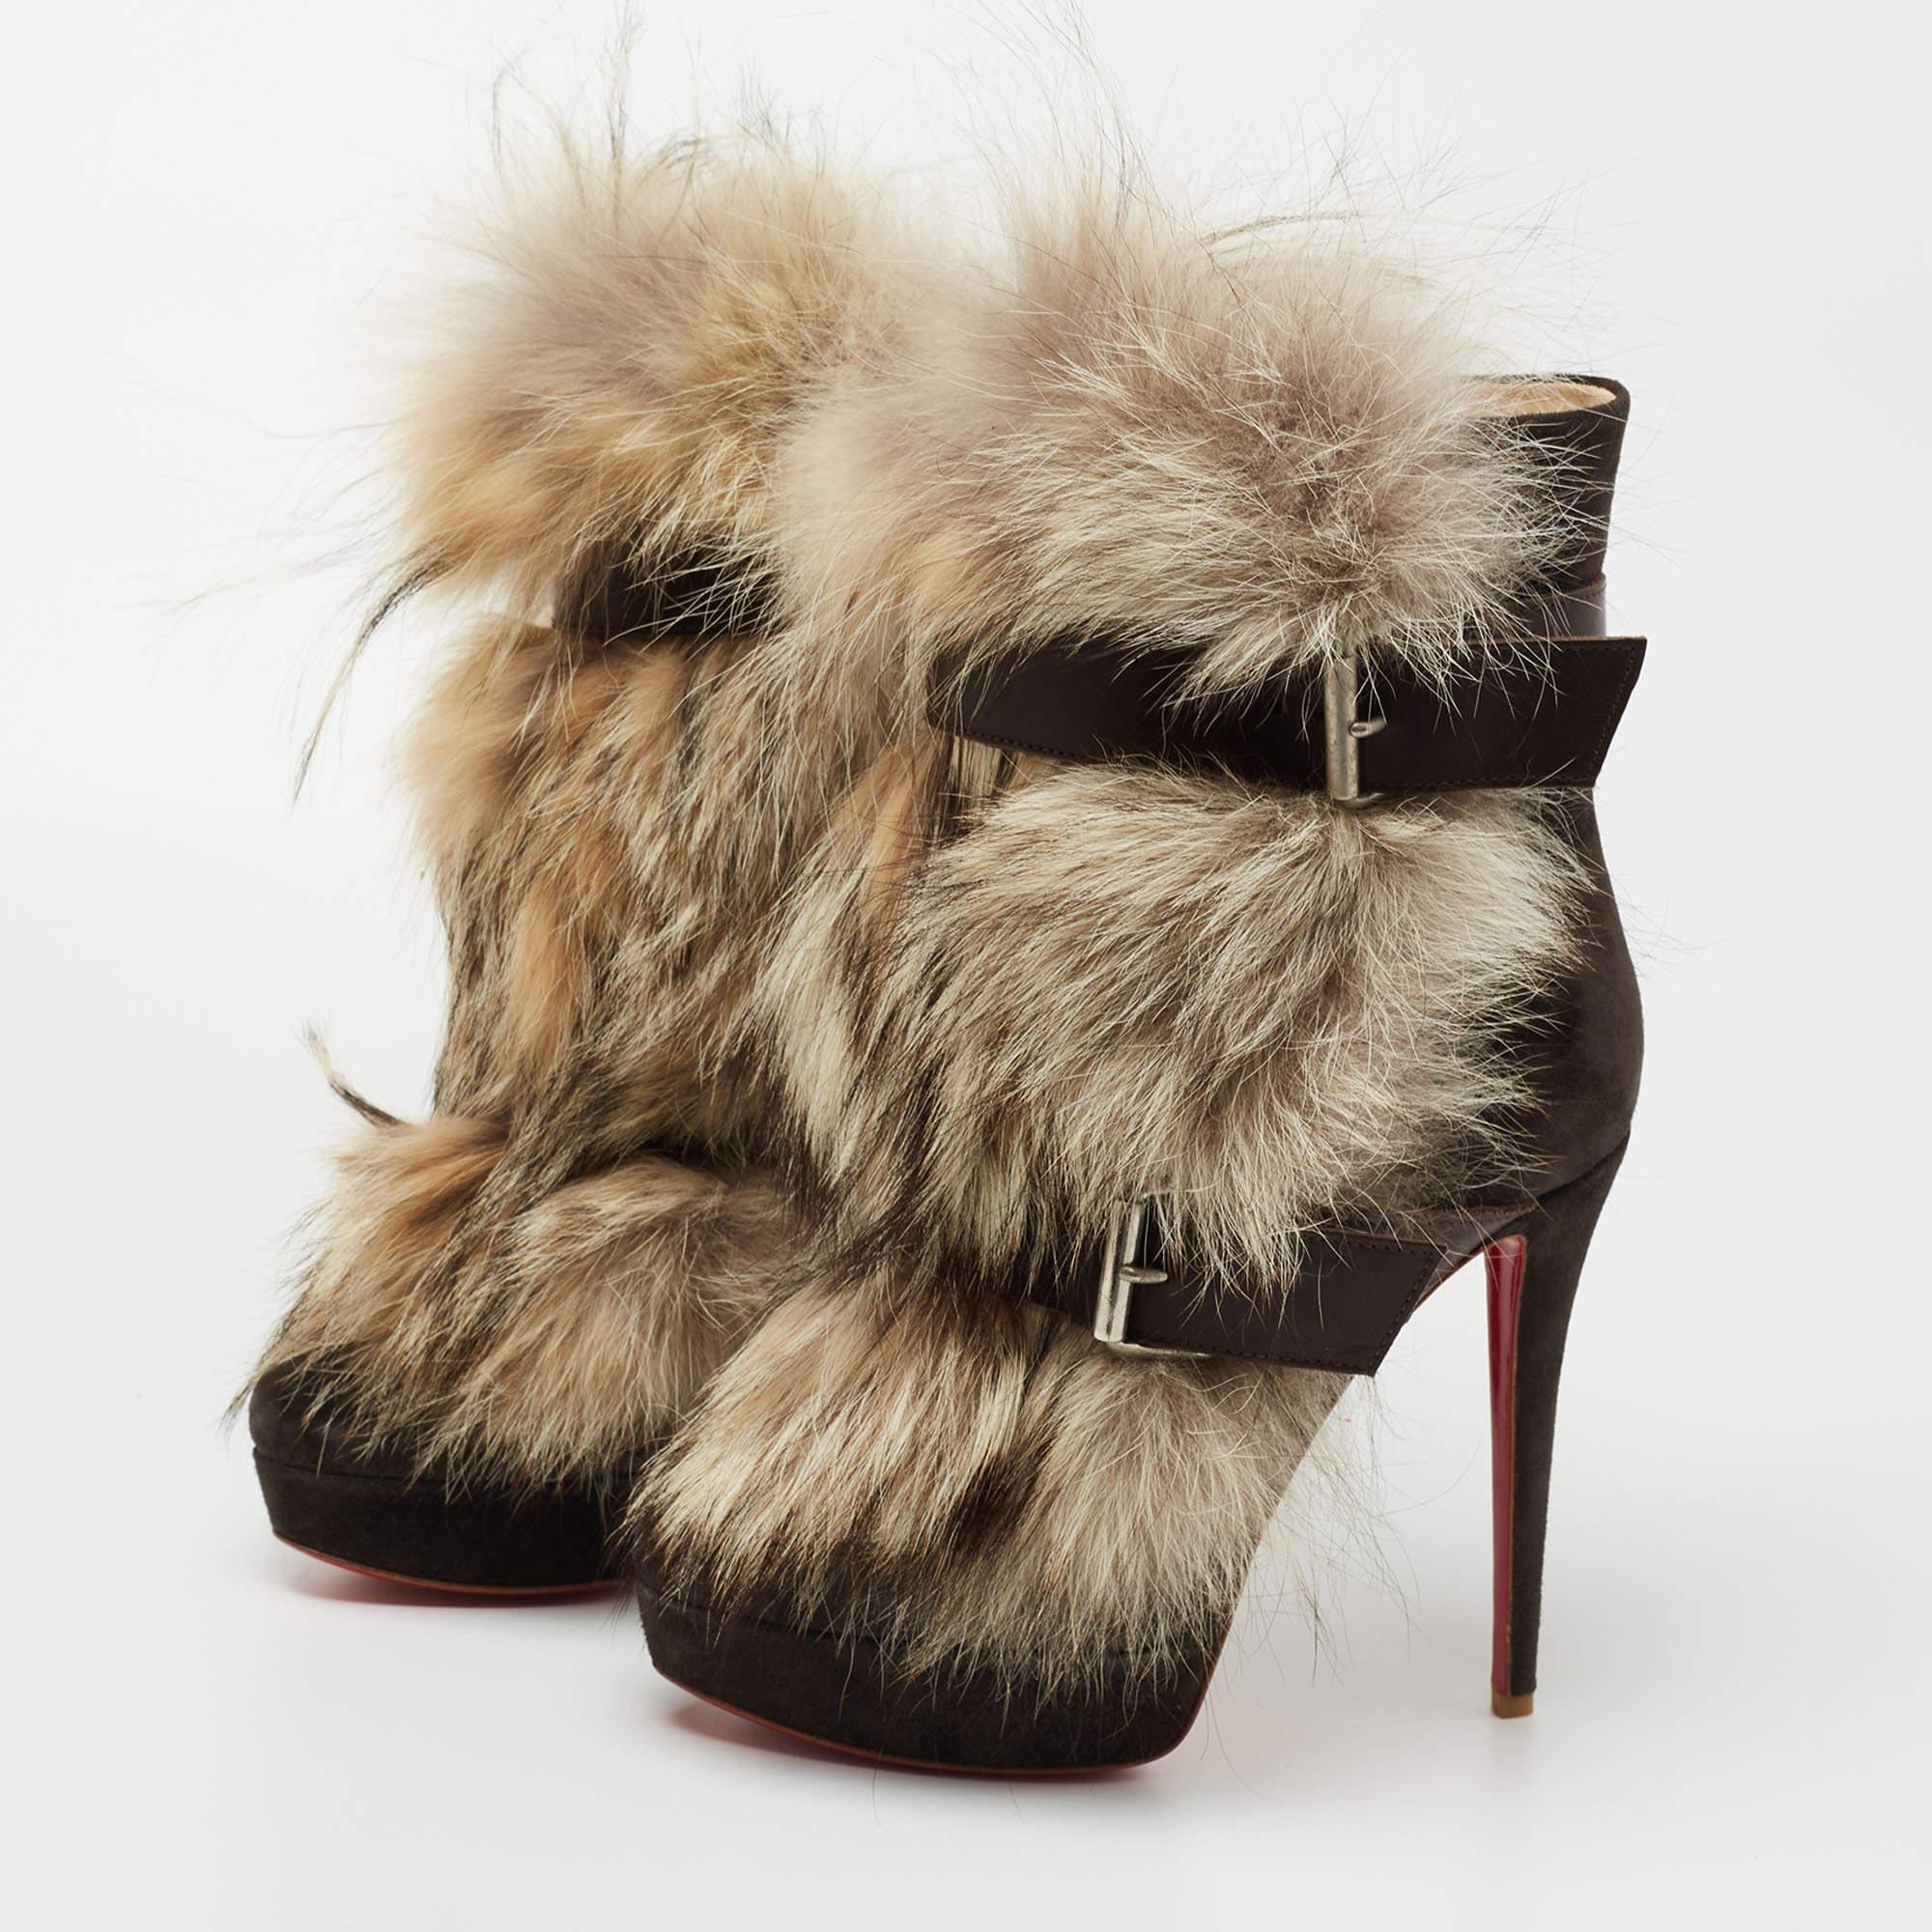 Women's Christian Louboutin Grey/Brown Leather Fur Platform Ankle Boots Size 39.5